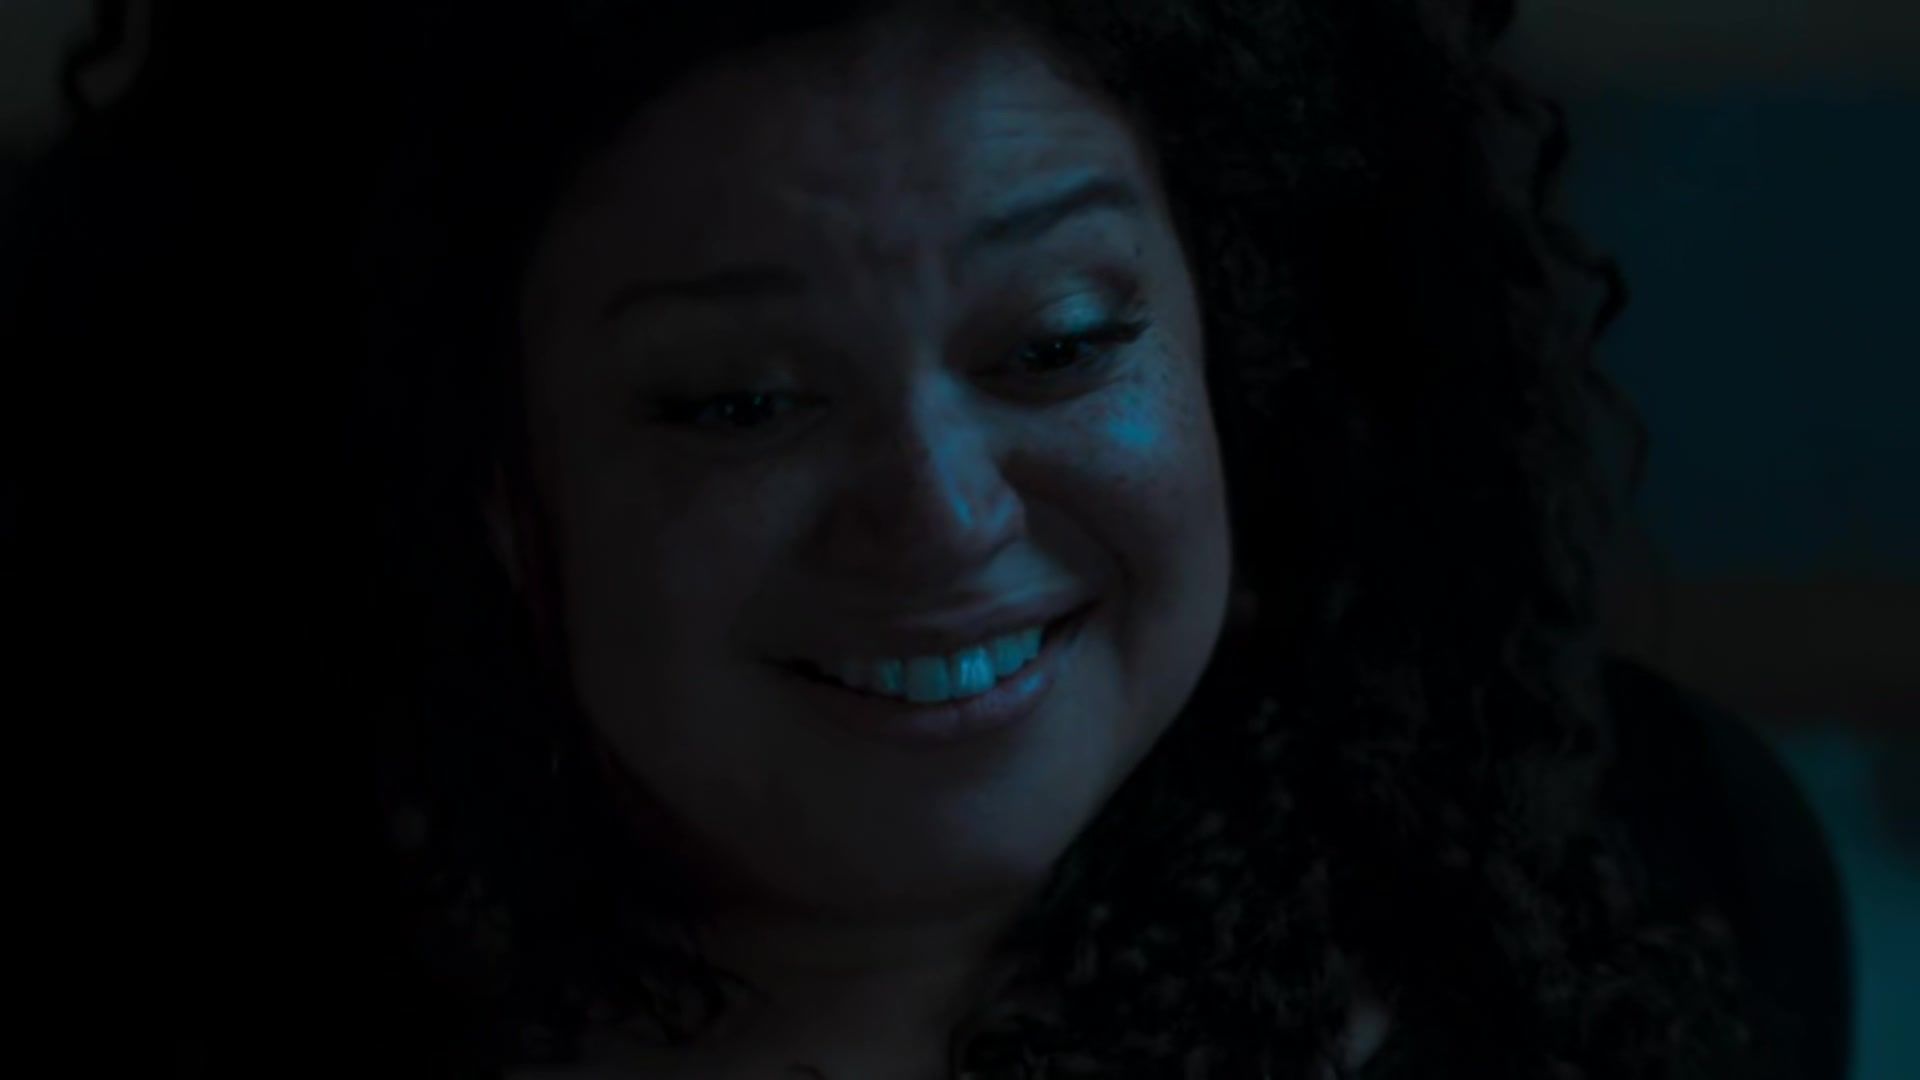 Beautiful Nude Michelle Buteau - The First Wives Club s01e01 (2019) Vagina